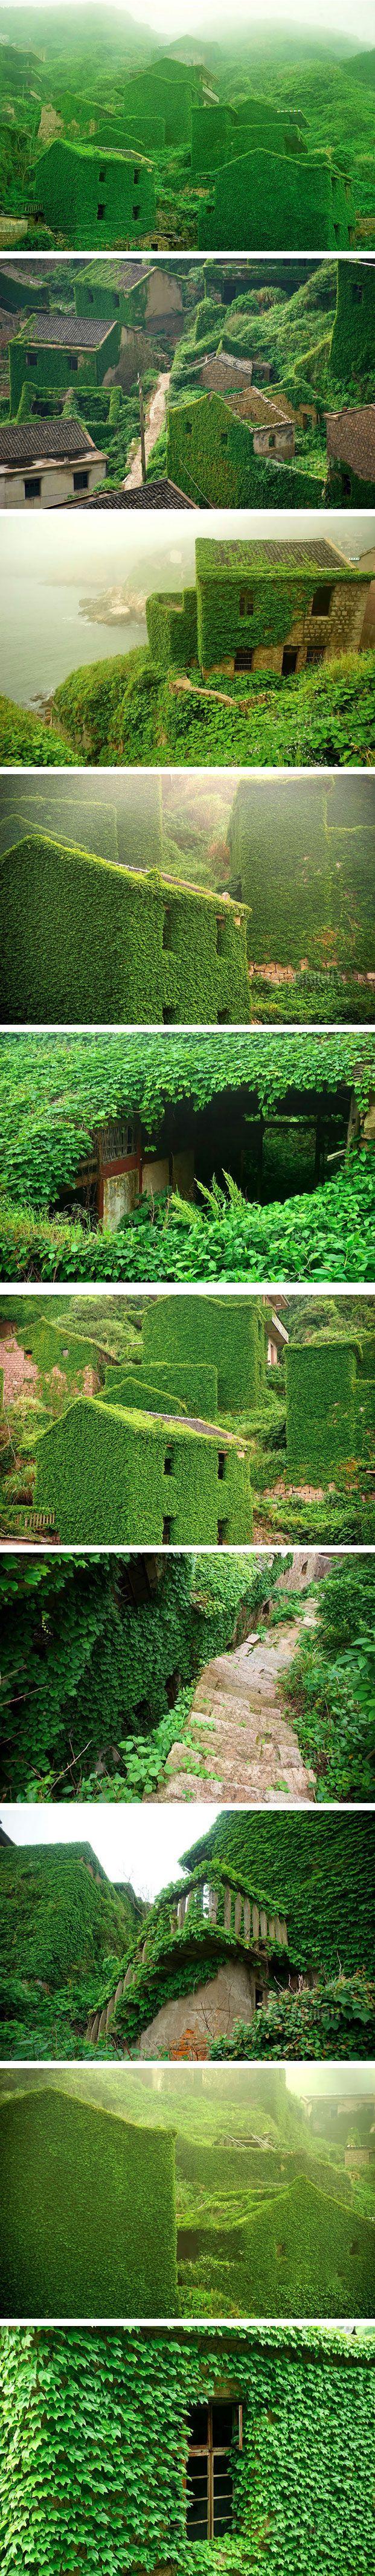 Mariage - Photographer Captures Amazing Images Of An Abandoned Chinese Fishing Village Being Reclaimed By Nature